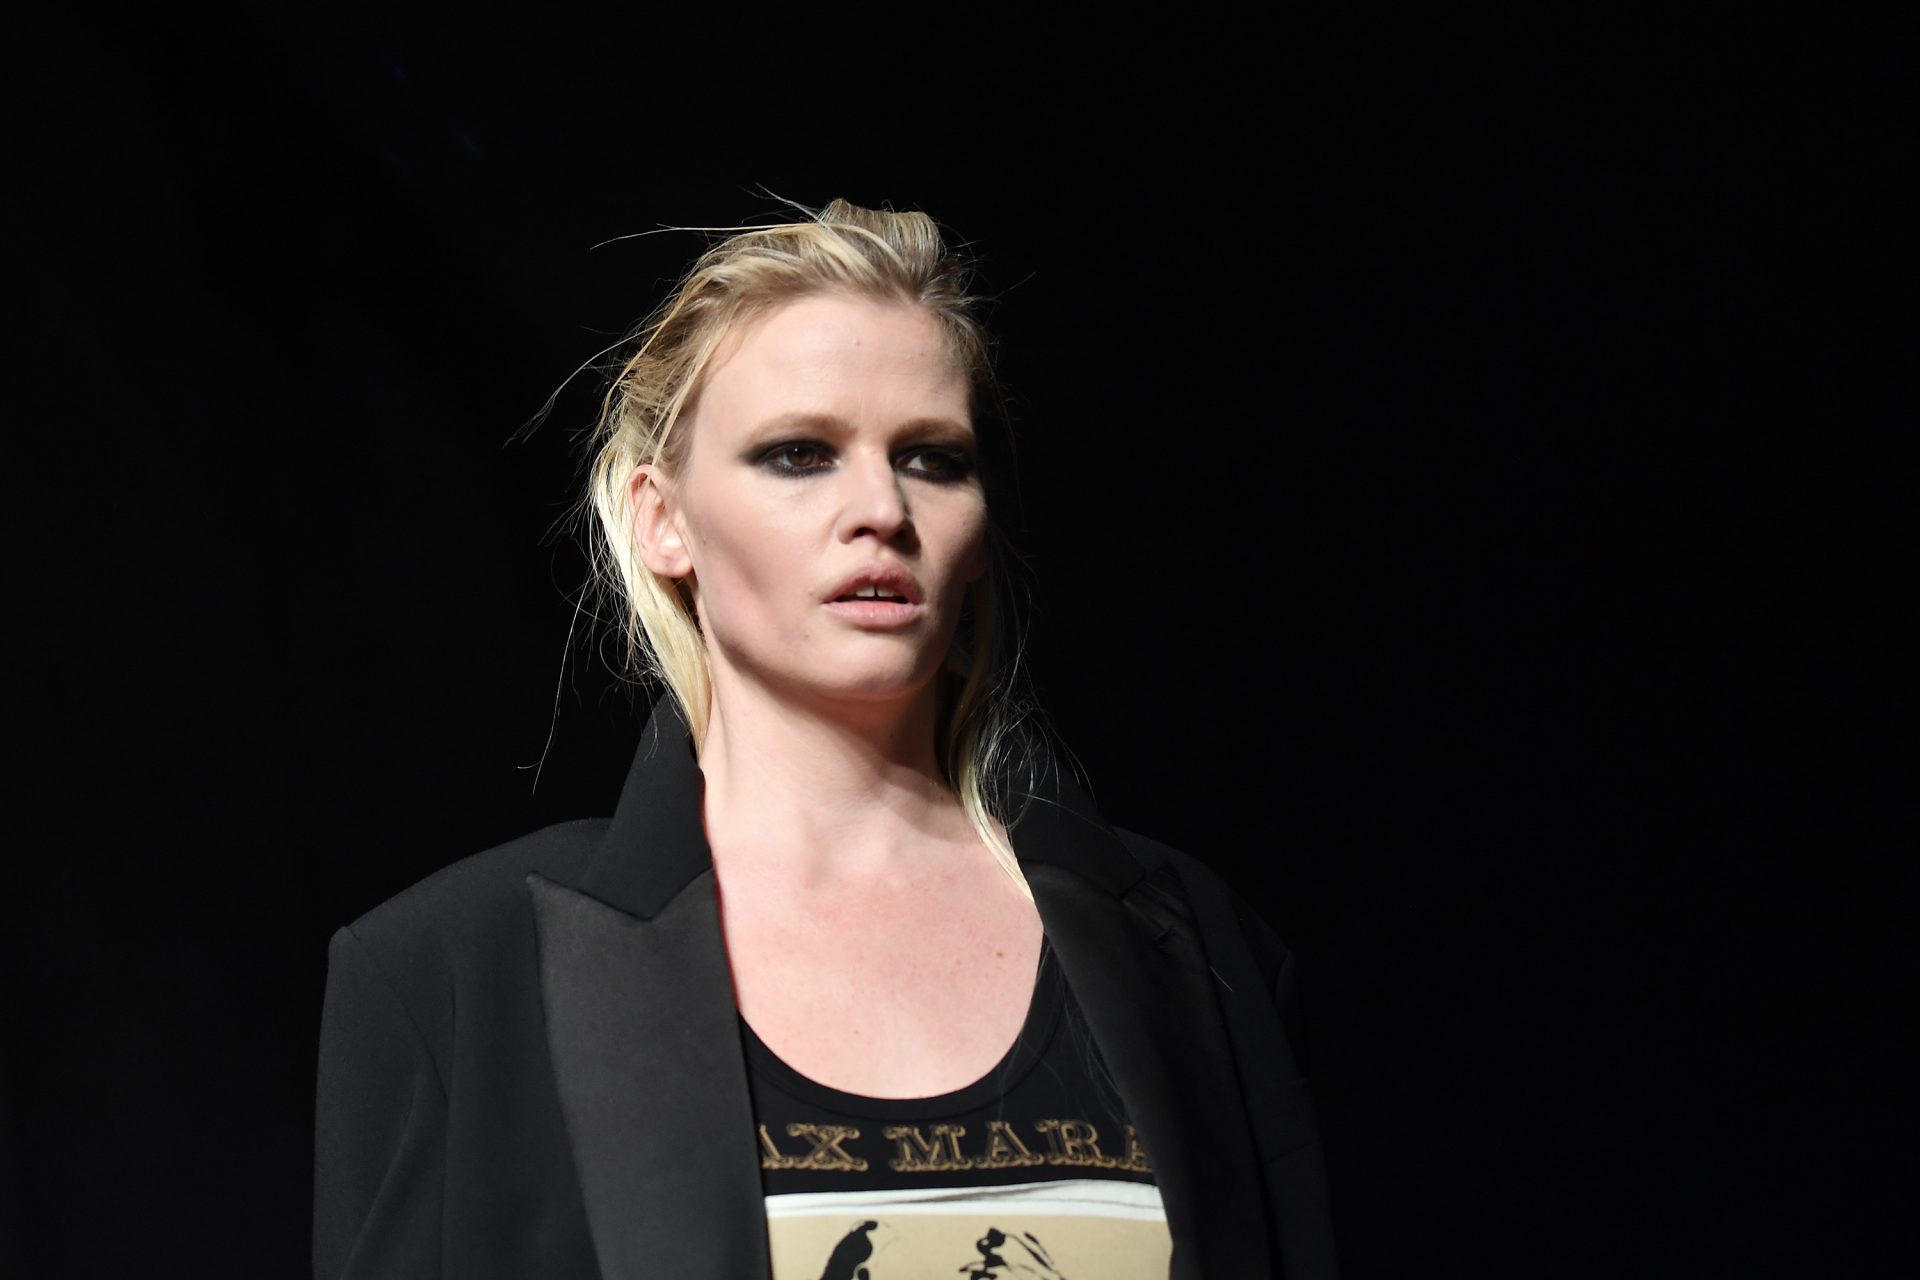 <p>Hailing from the Netherlands, a top model born in 1983 made a splash in 2006 by signing with IMG Models, allowing her to work with the finest in international fashion.</p> <p>Net worth: $14 million</p>